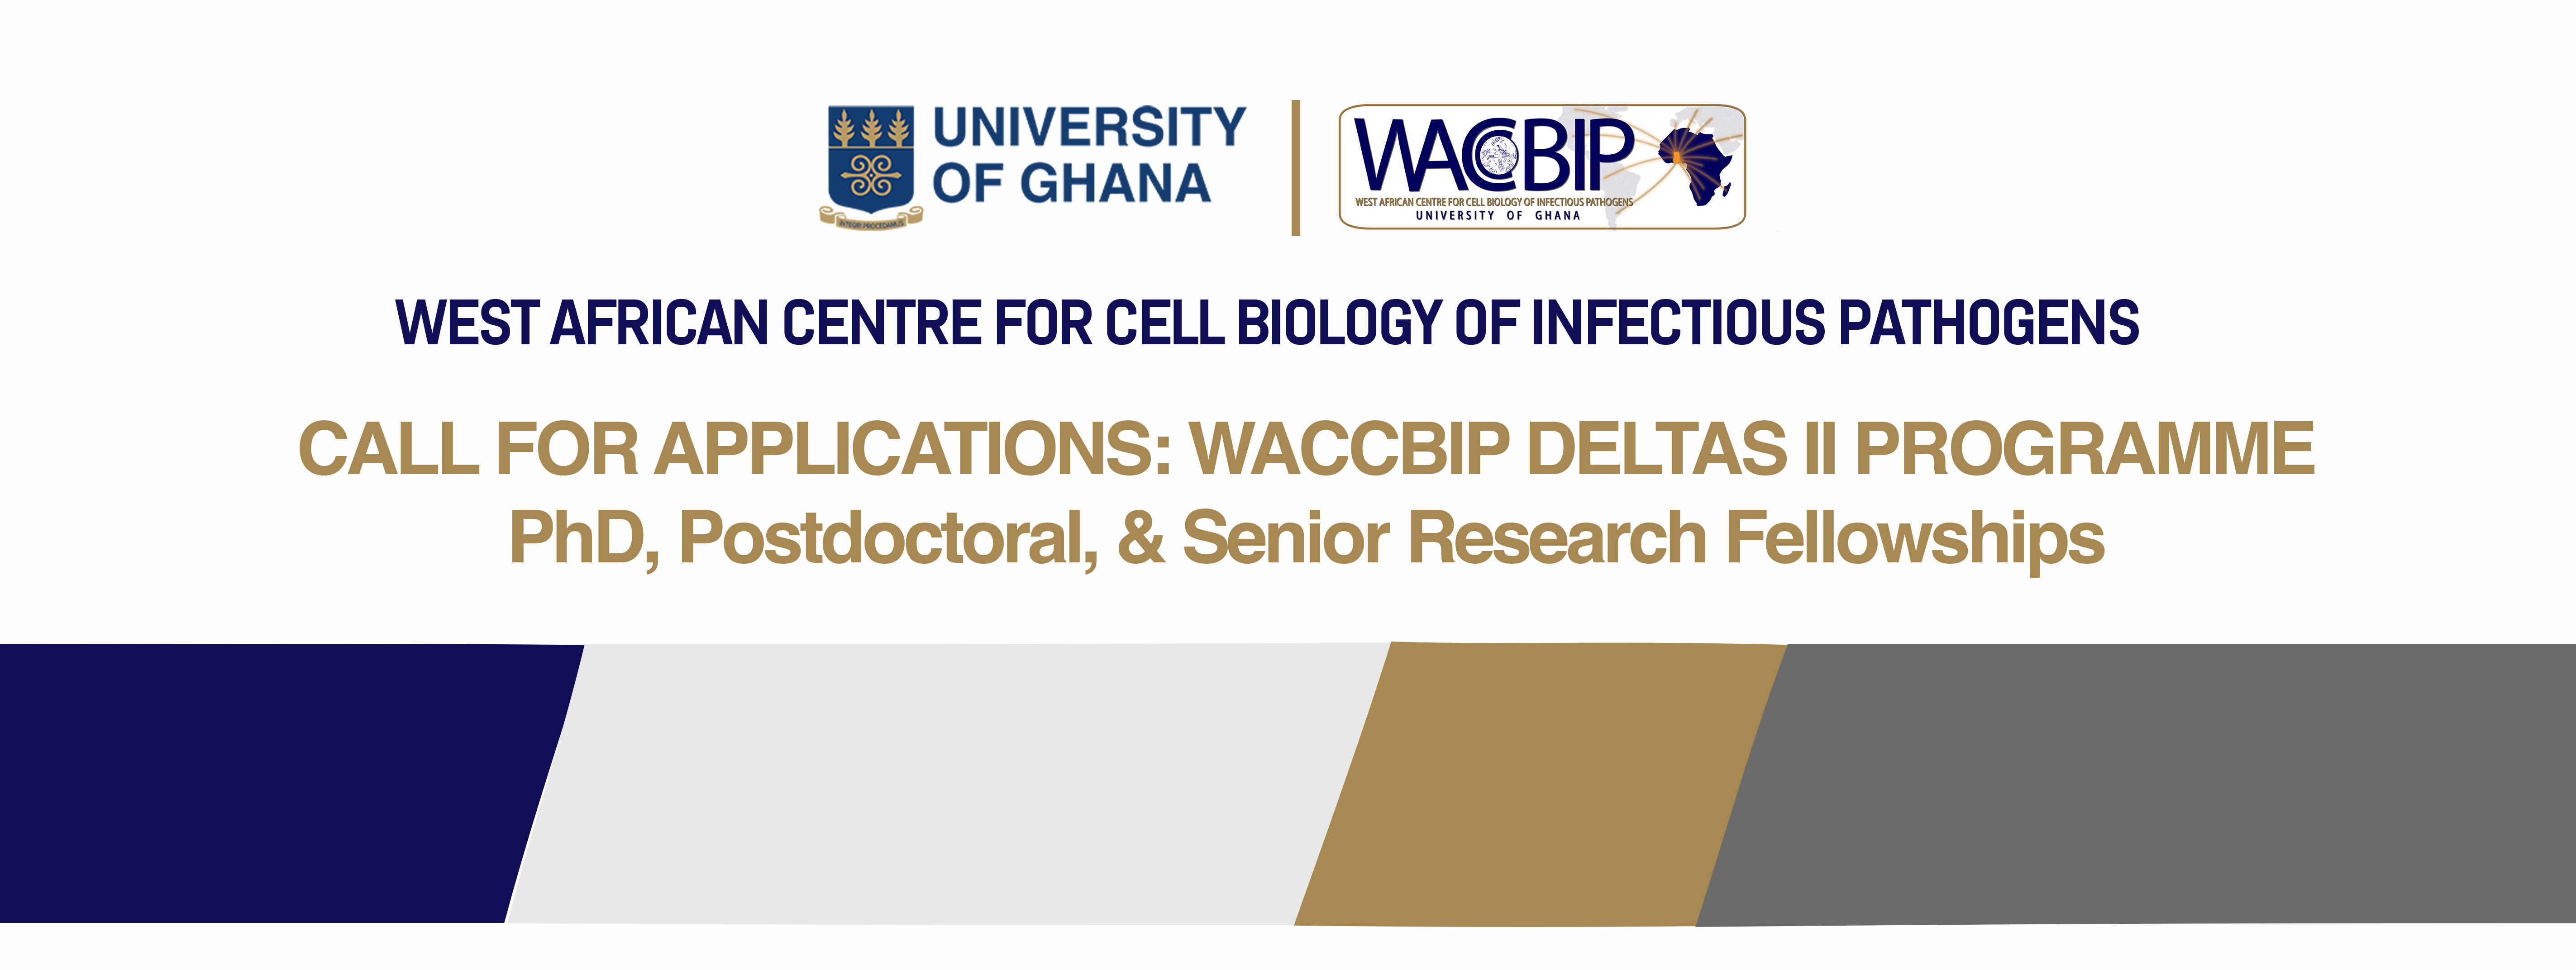 CALL FOR APPLICATIONS: WACCBIP DELTAS II PROGRAMME PhD, POSTDOCTORAL, AND SENIOR RESEARCH FELLOWSHIPS